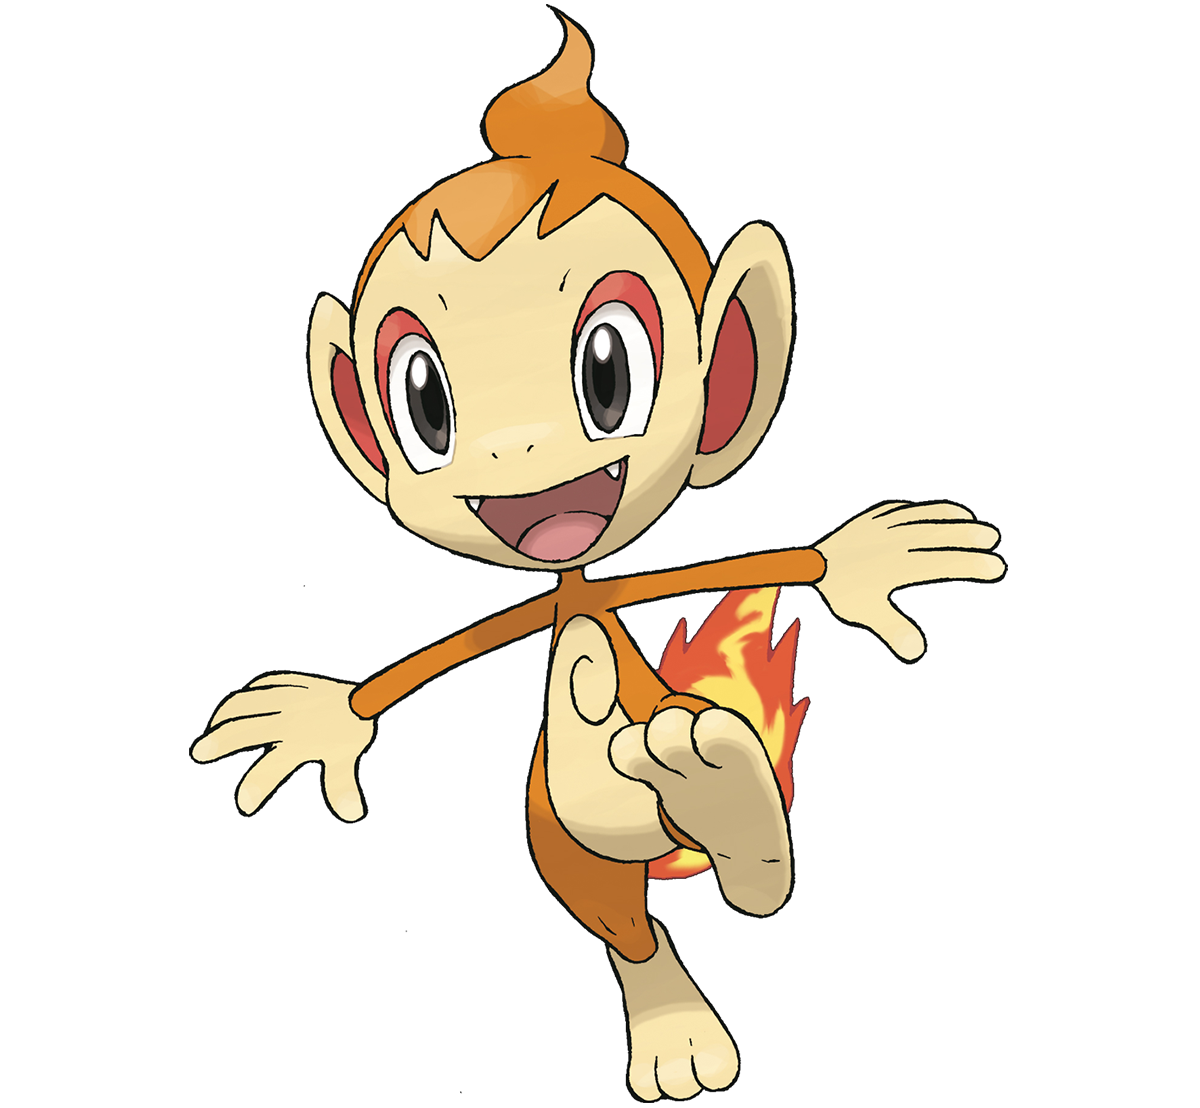 Chimchar.png